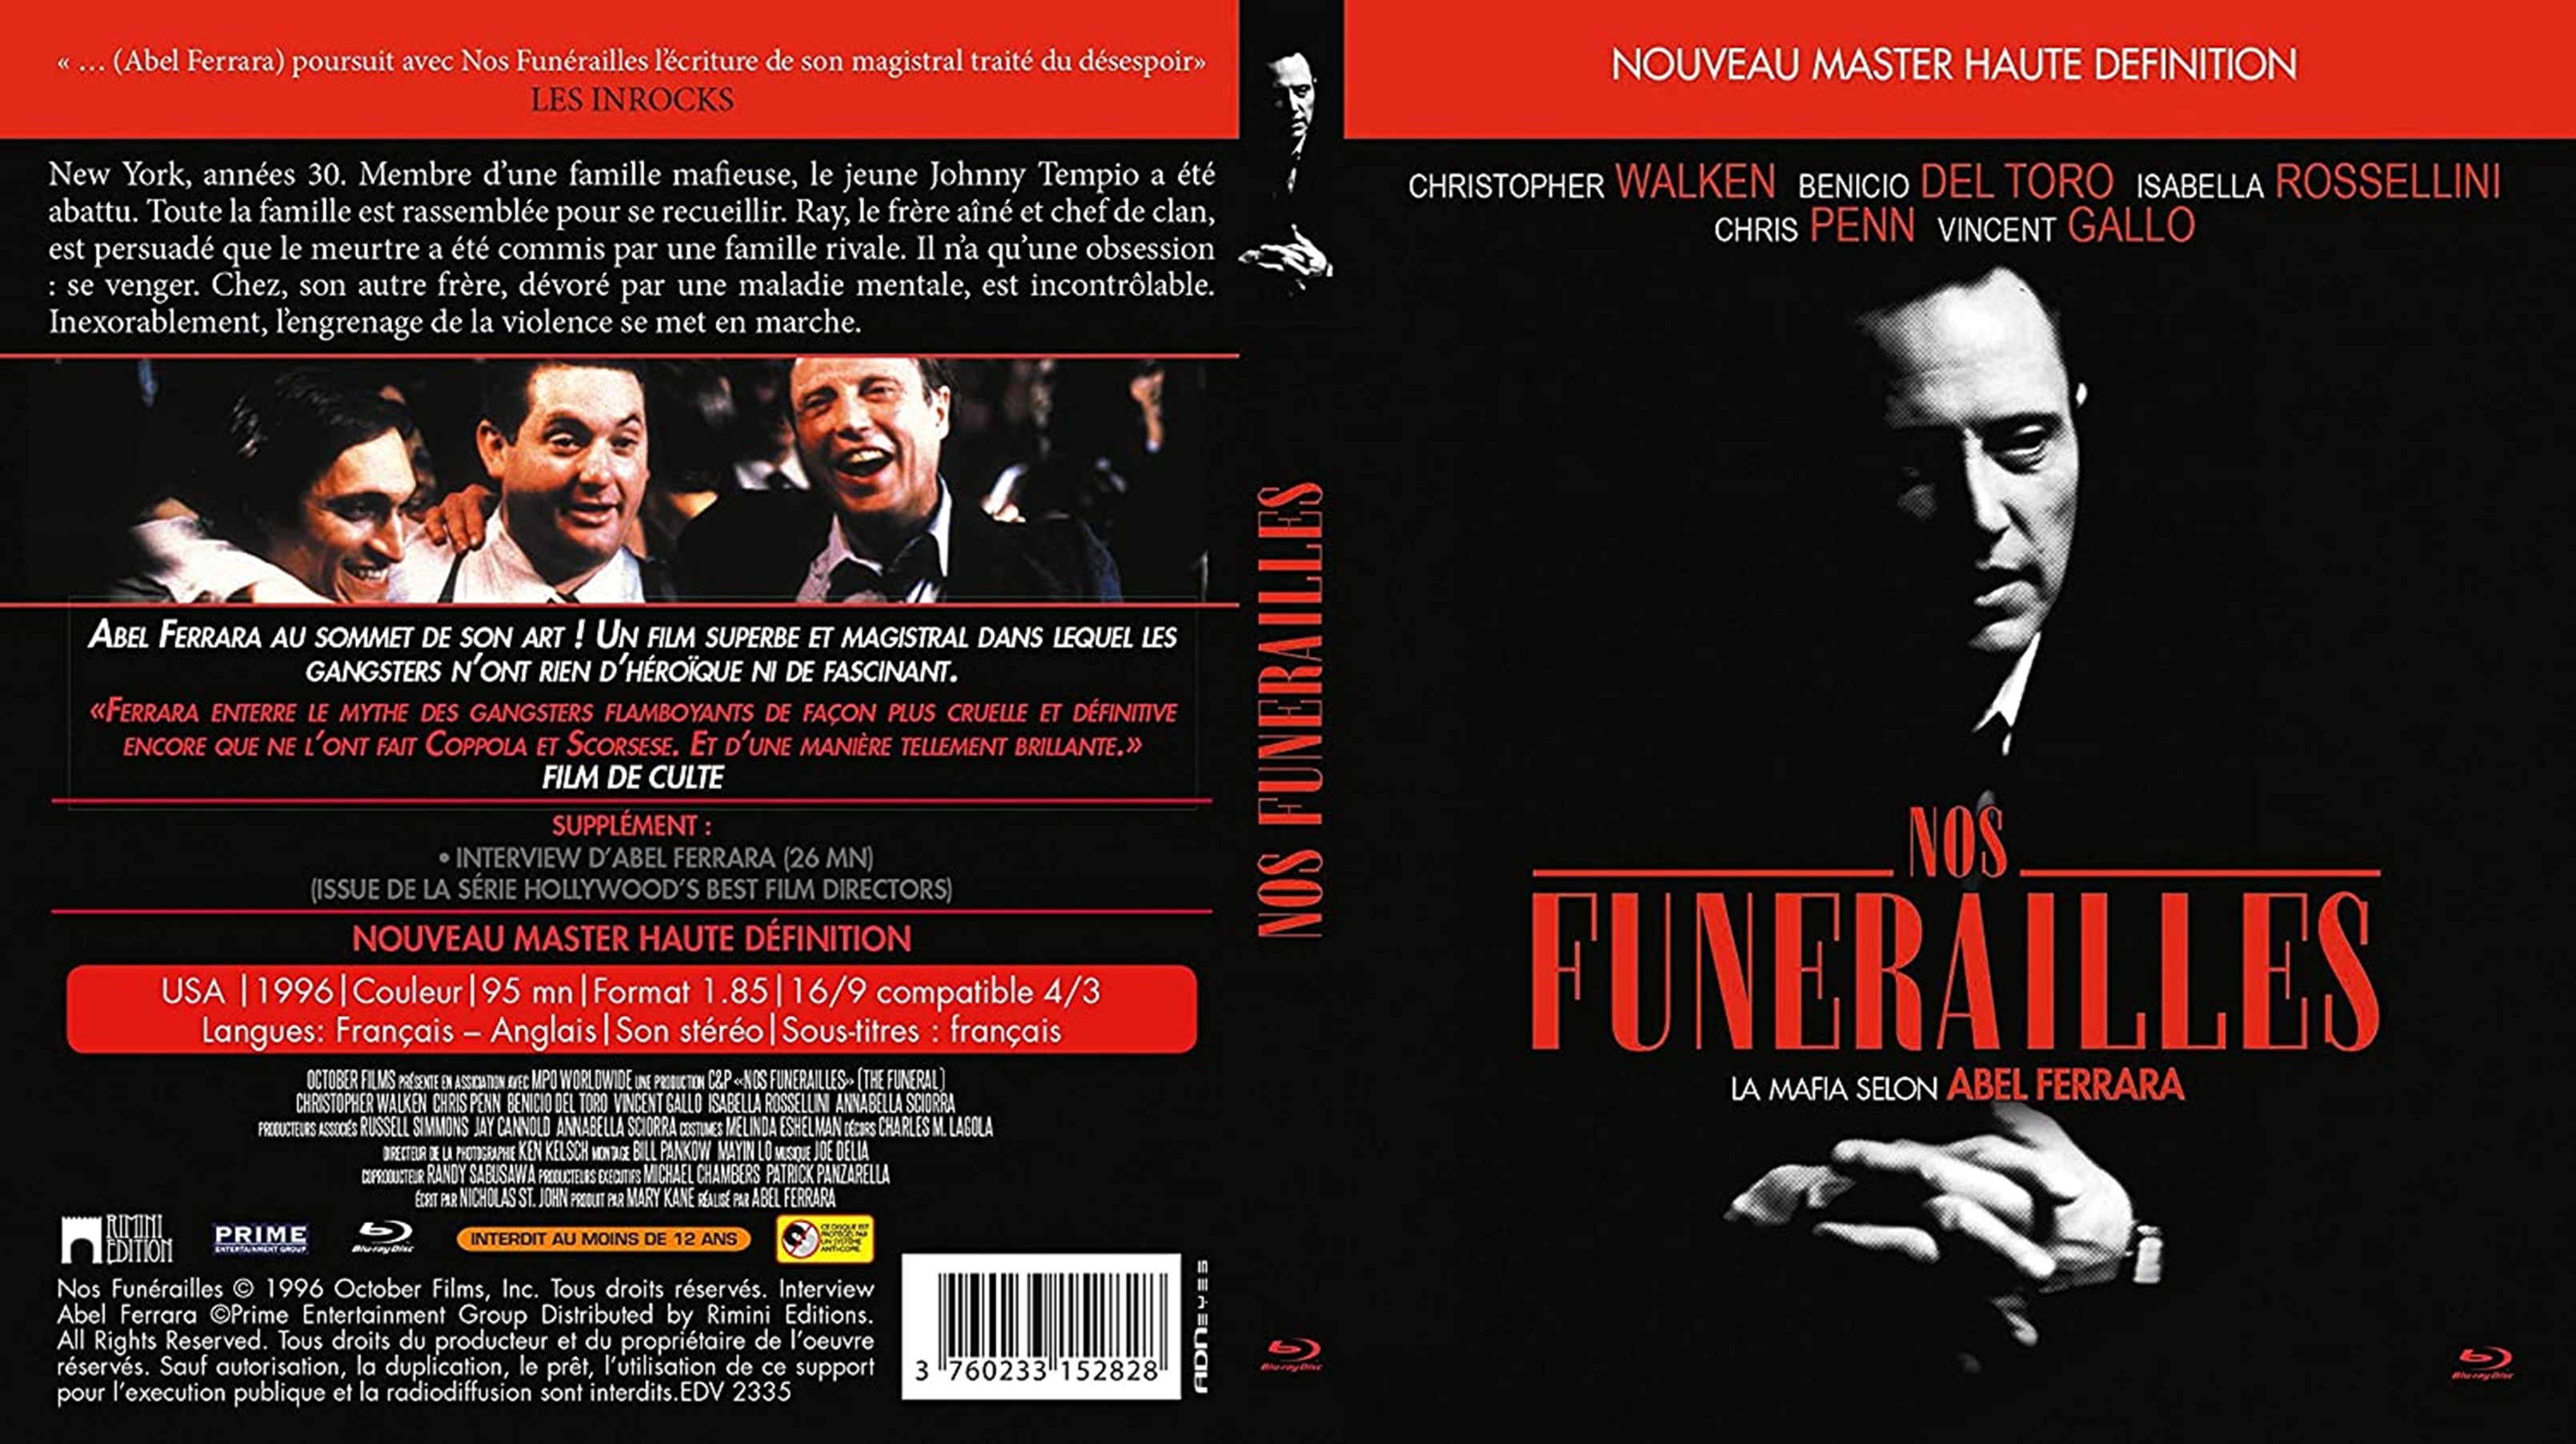 Jaquette DVD Nos Funerailles (BLU-RAY) v2